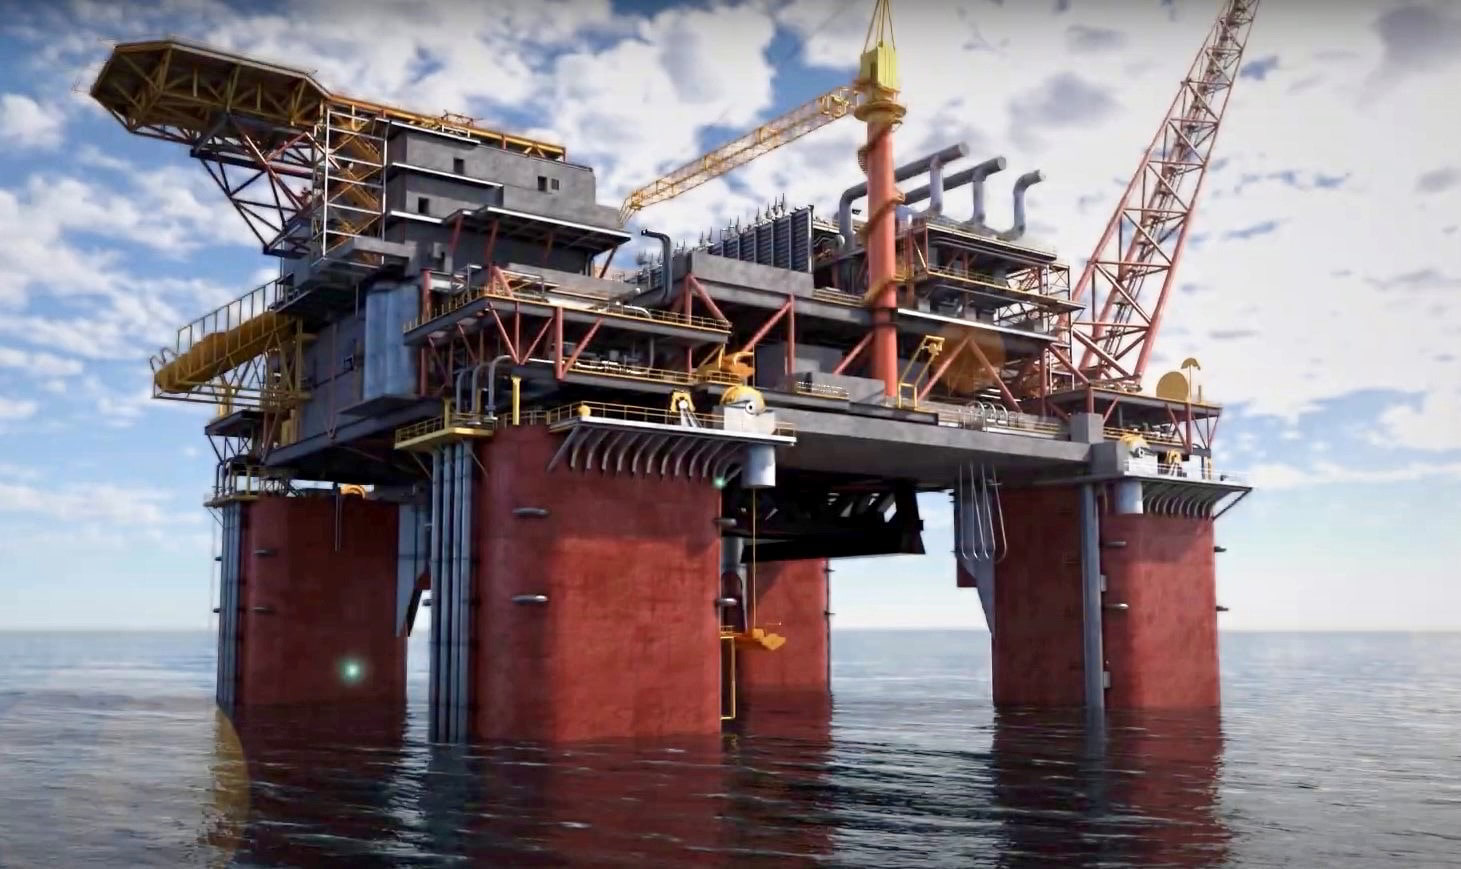 US player enters Australian gas market thanks to new gig for Woodside’s Scarborough project